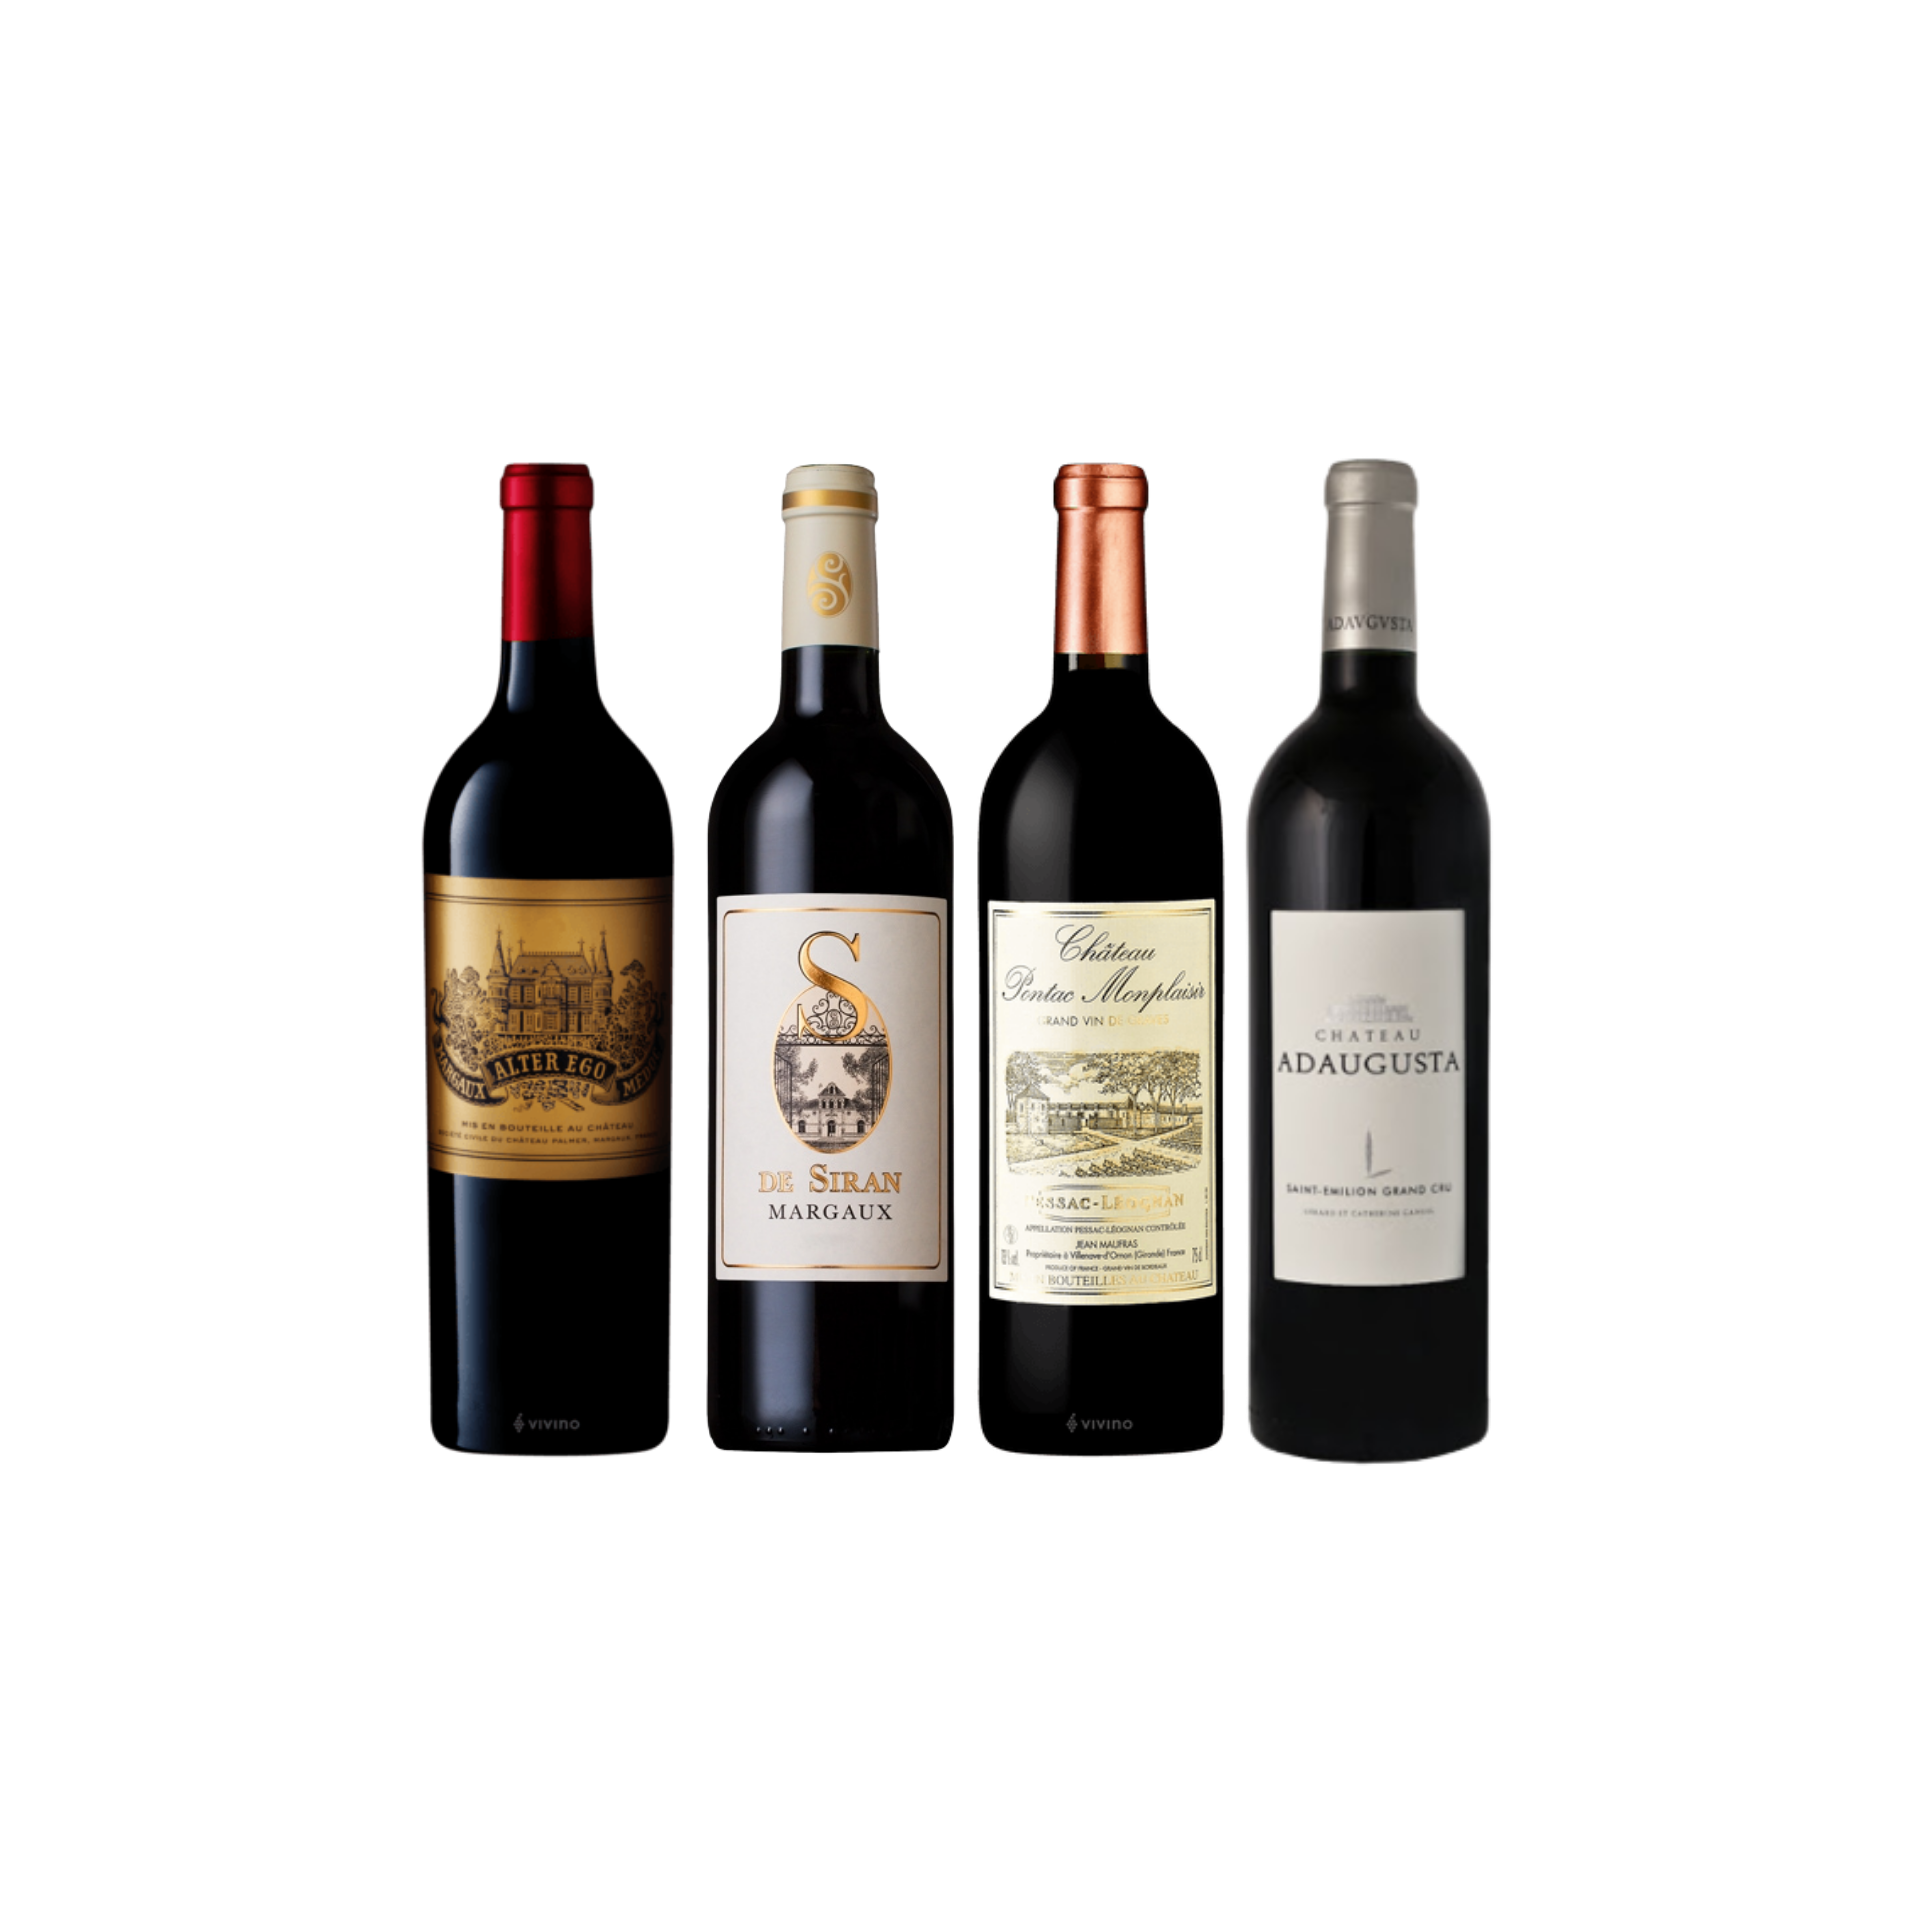 Enjoy 3 Bottles of French Red Wine From Margaux and Pessac Leognan at Only $199 And Top-Up $48 for A Bottle of Adaugusta Saint Emilion Worth $68